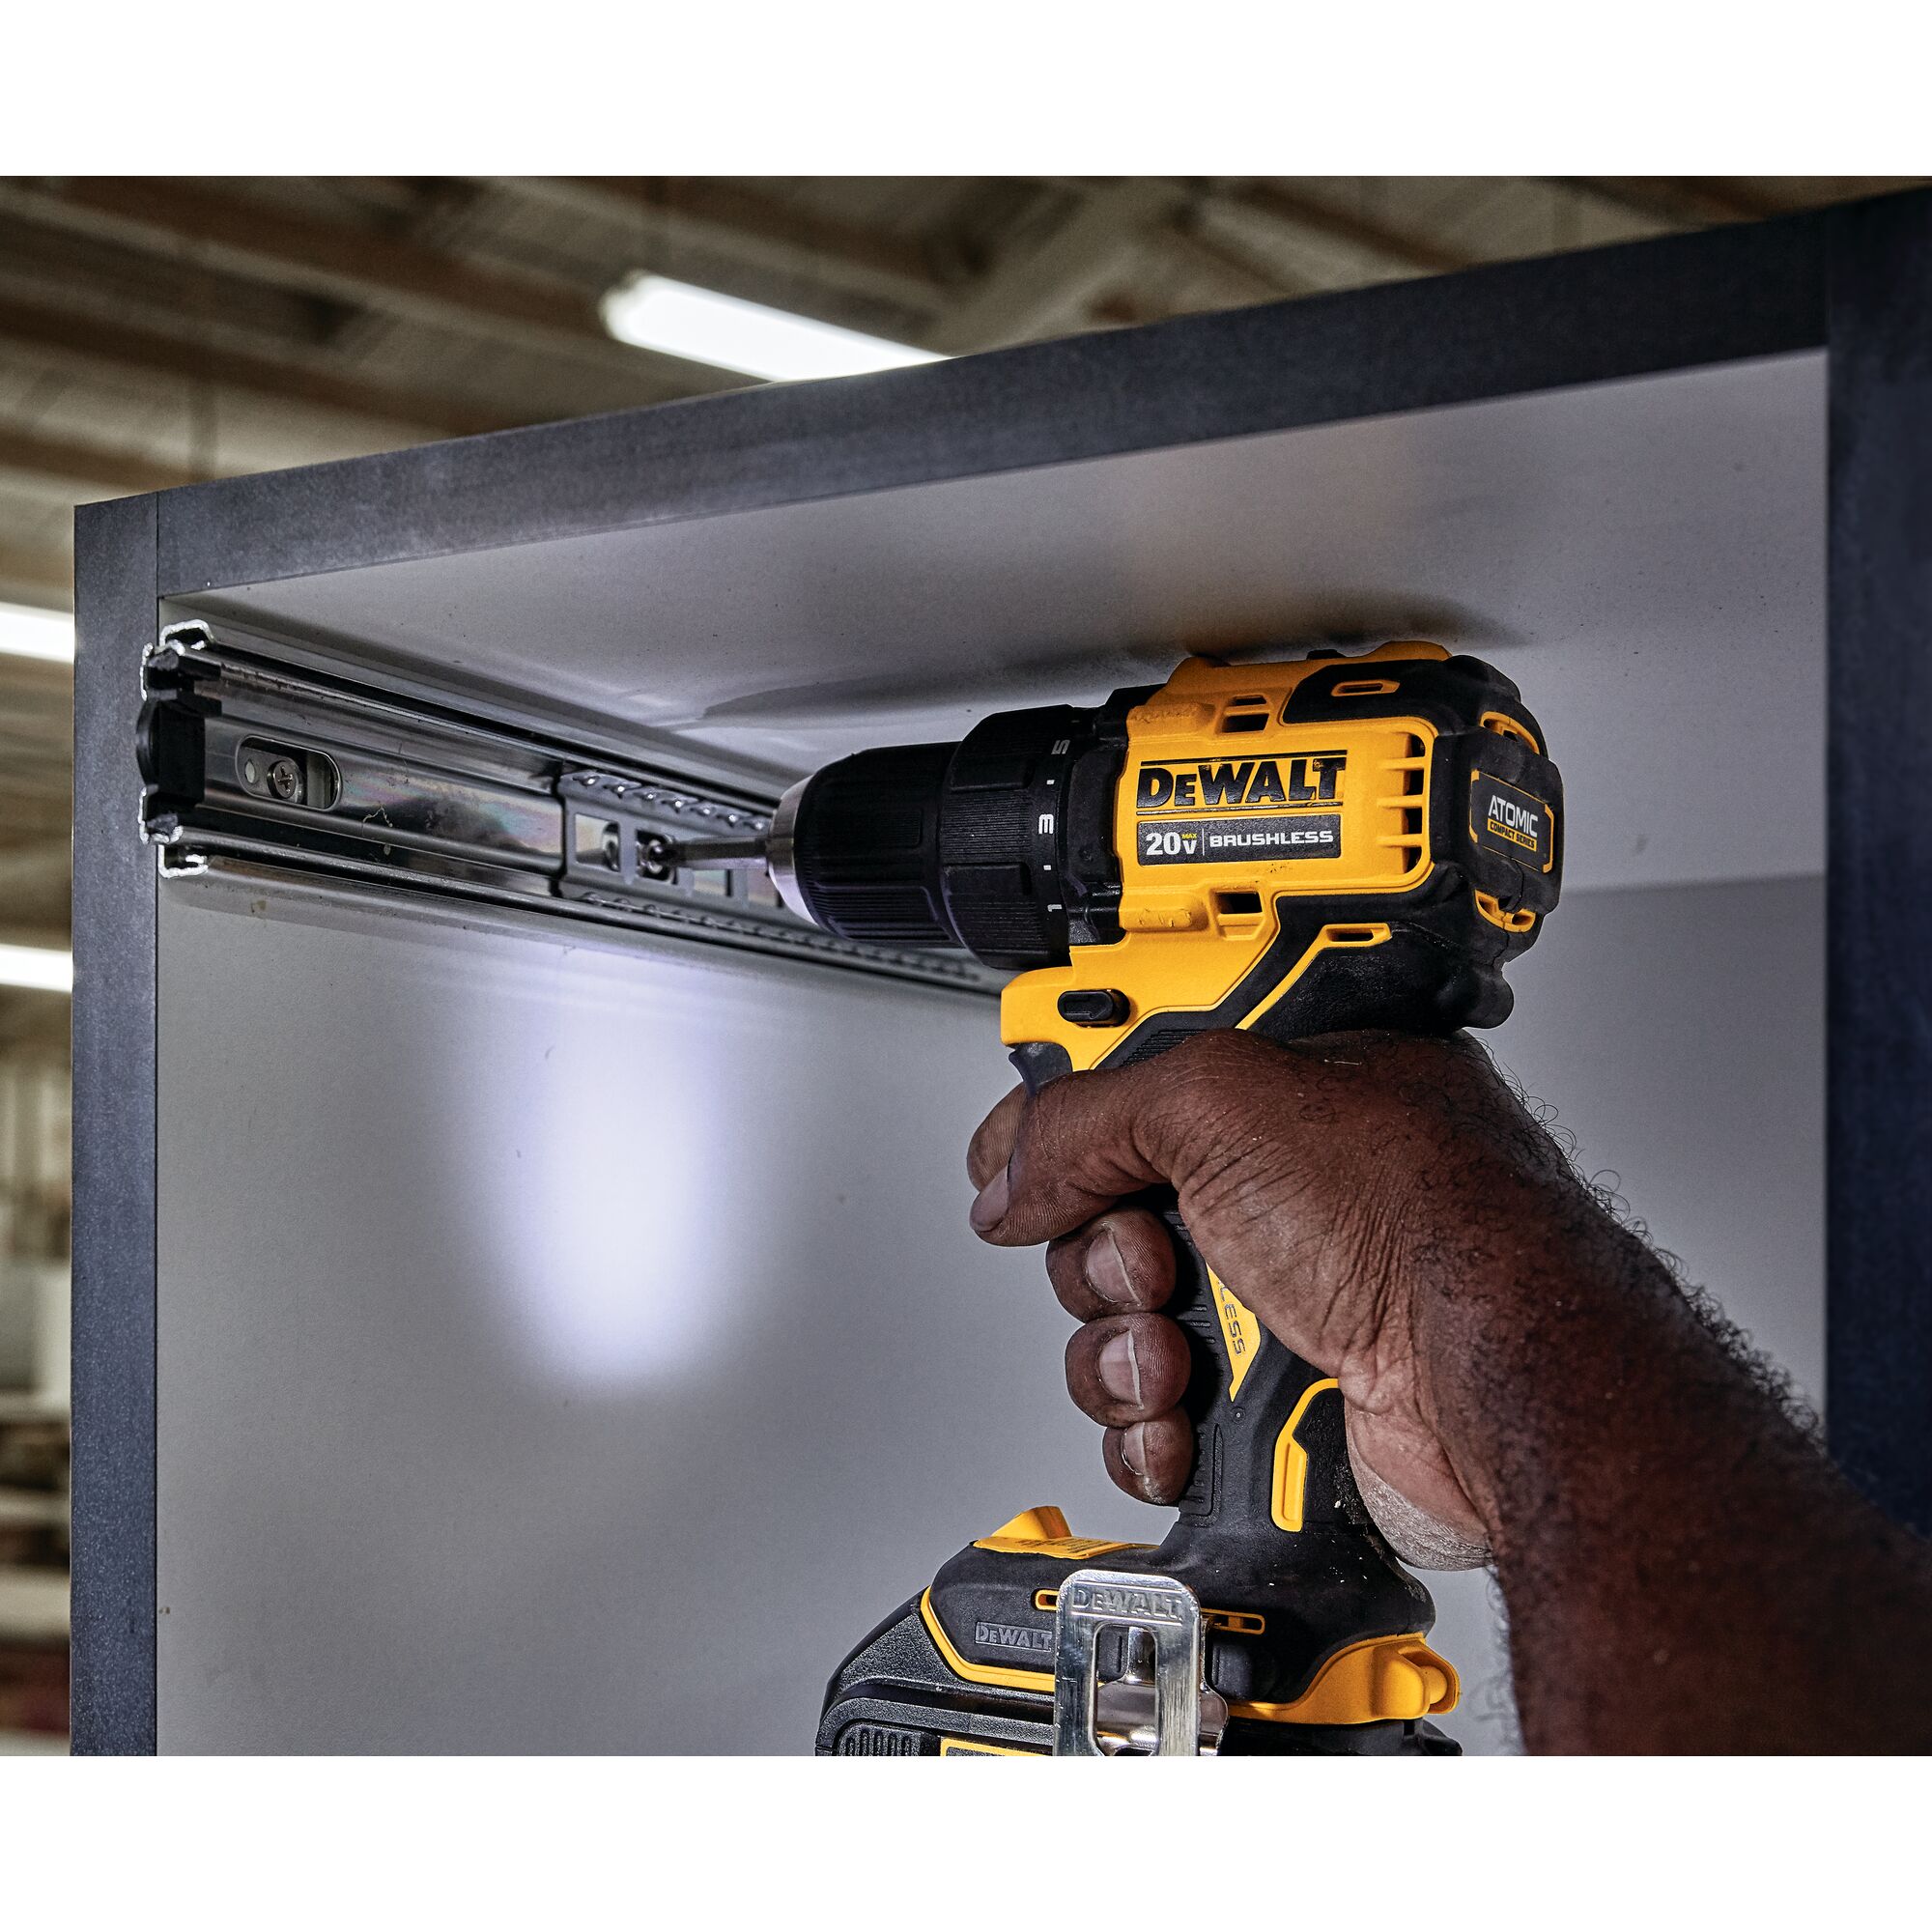 Details about   Dewalt DCD708 1/2" Brushless Cordless Drill Driver USED U77 